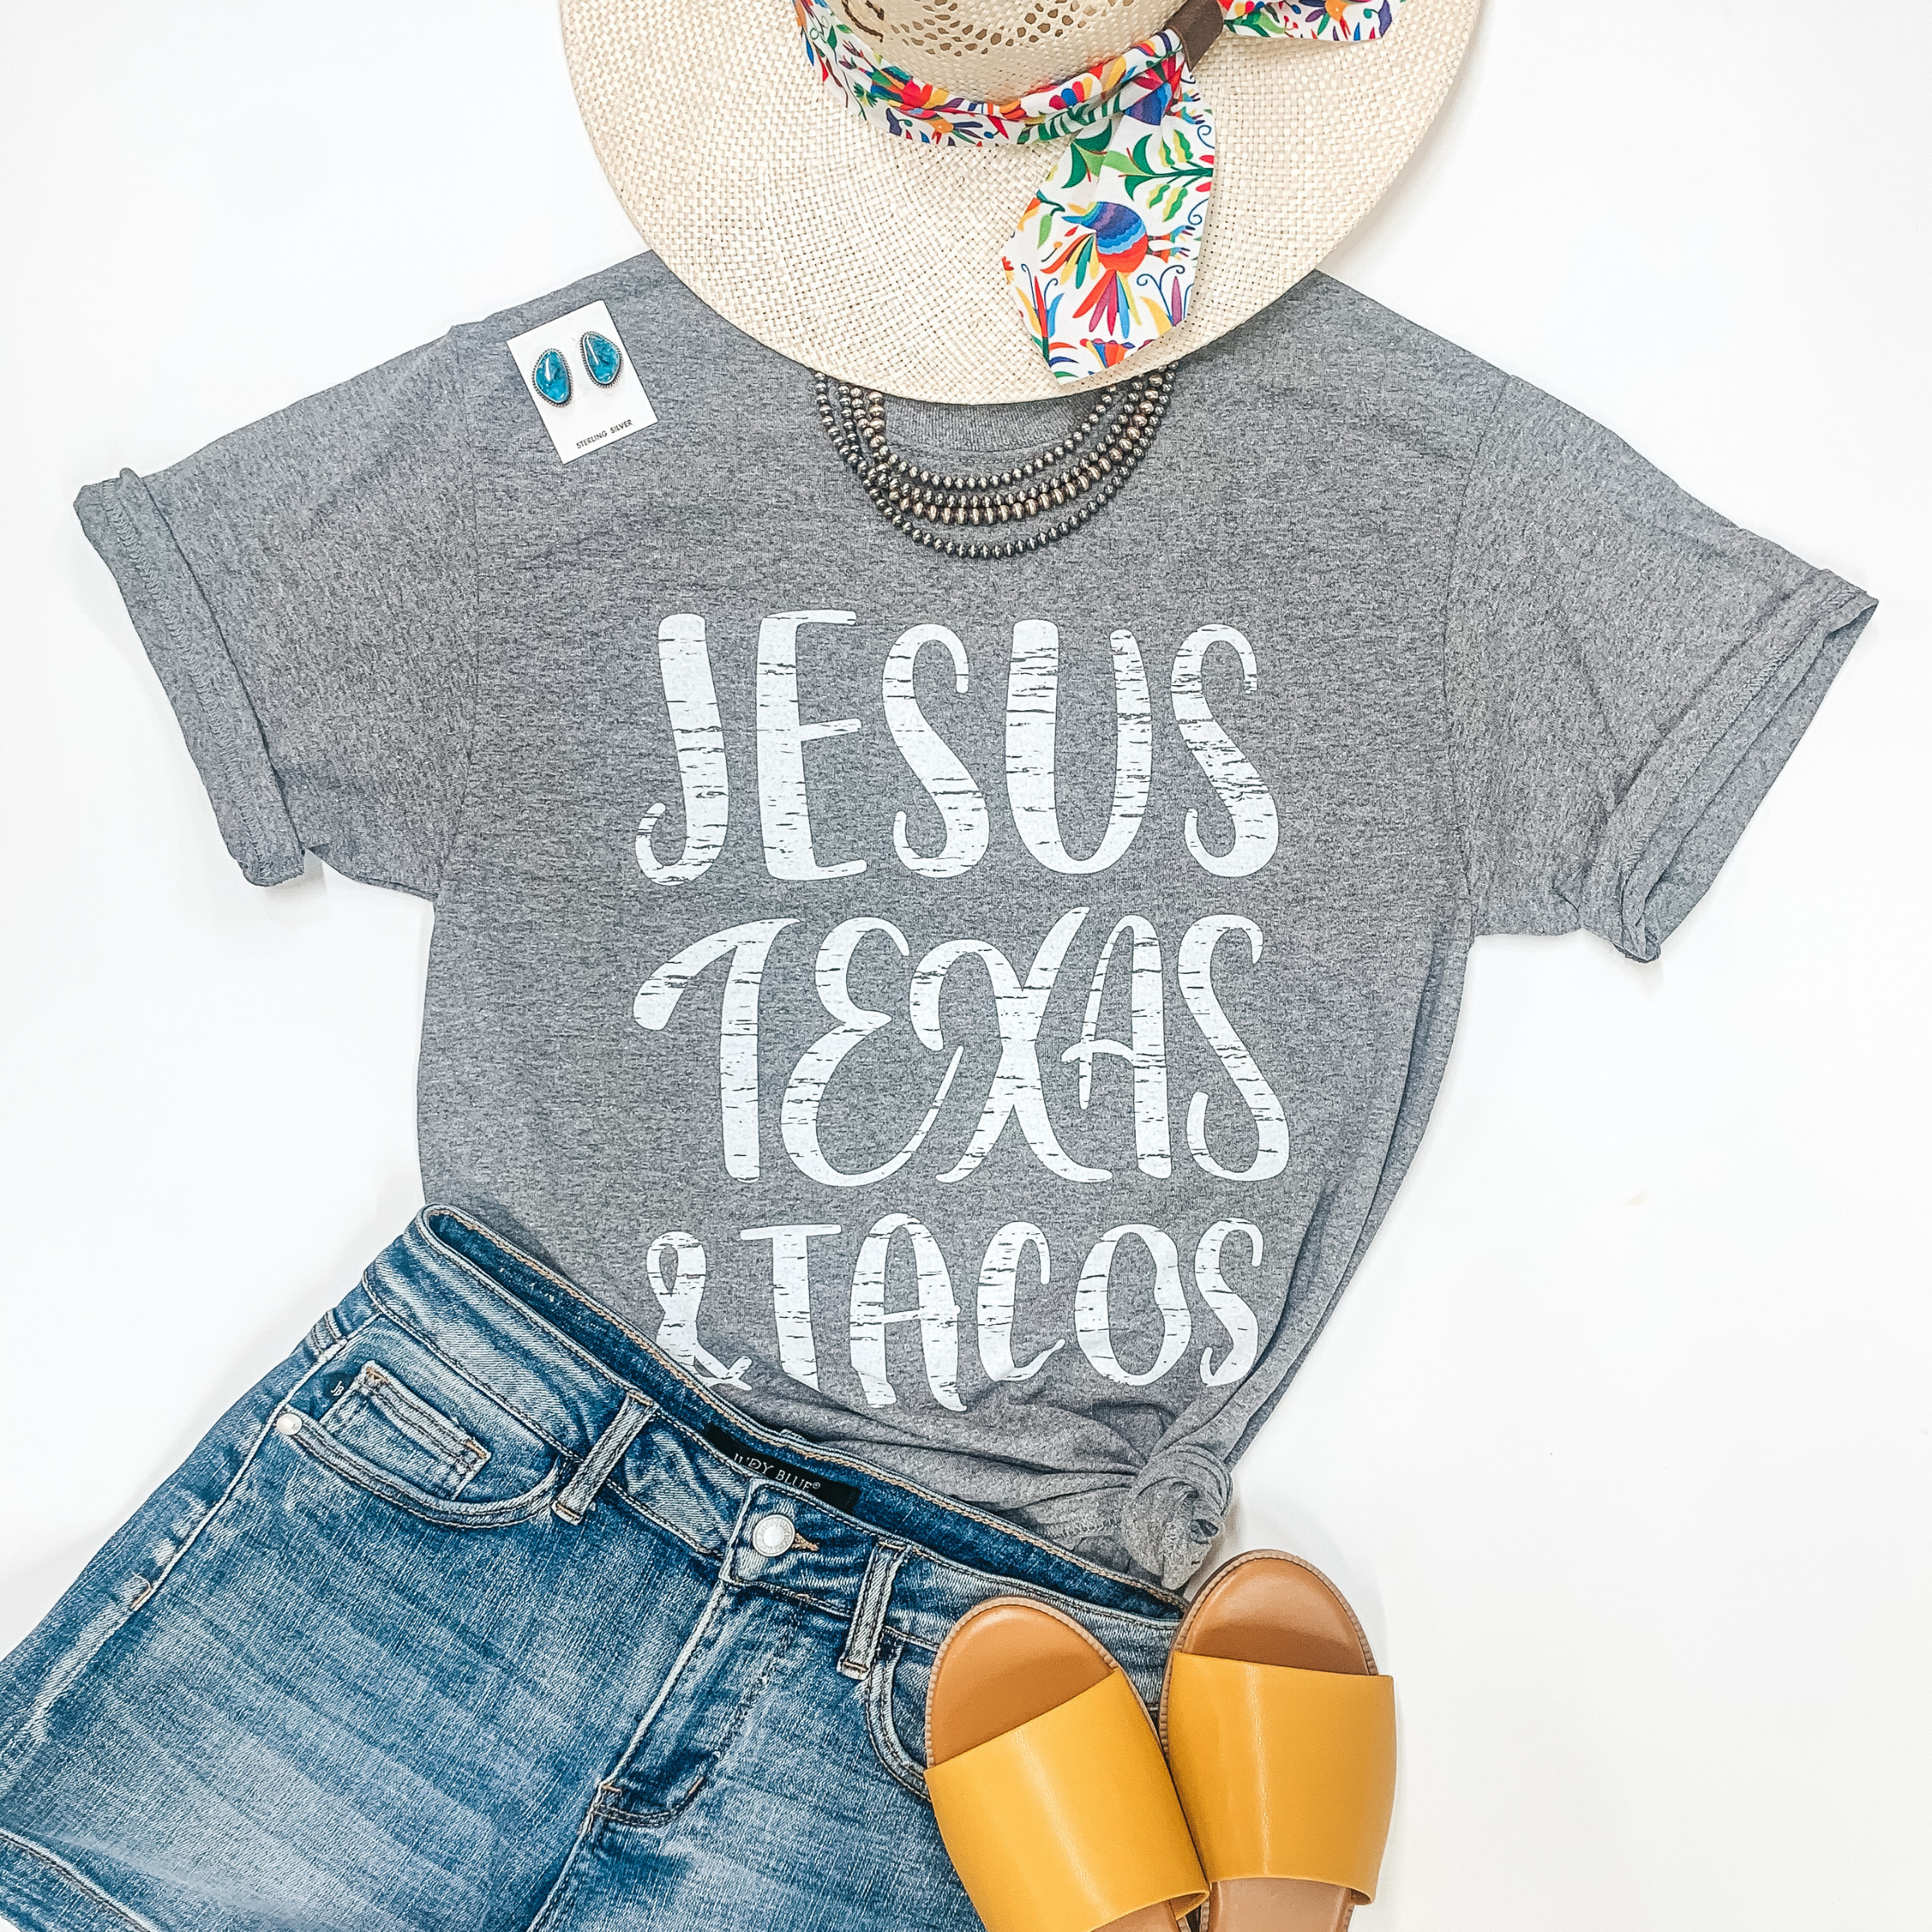 A grey tee shirt with "Jesus Texas & Tacos." Pictured with a straw hat, genuine Navajo jewelry, yellow sandals, and denim shorts.